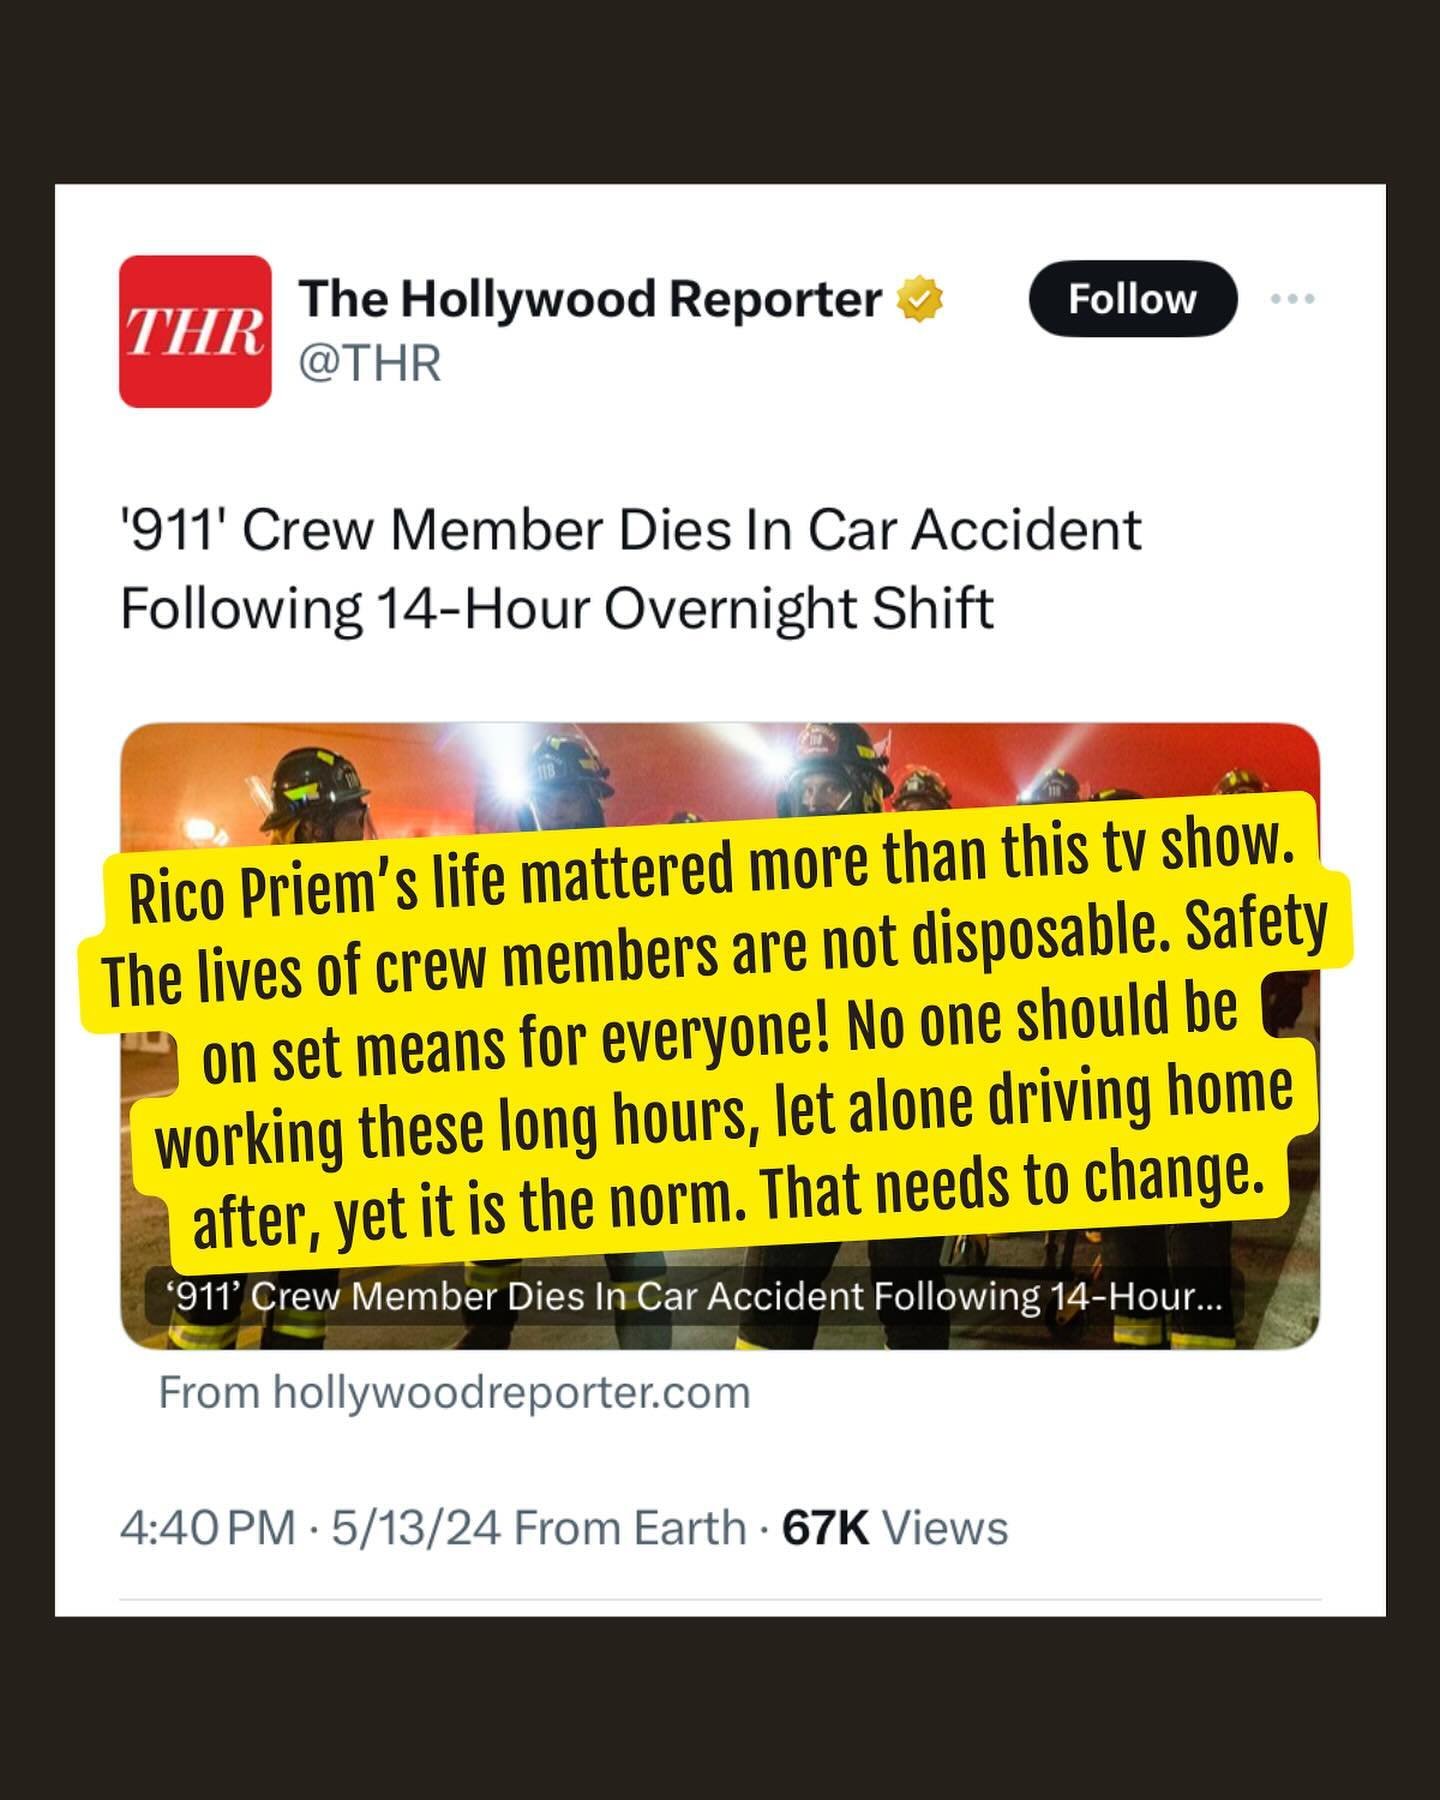 Rico Priem should still be alive. This could and should have been avoided. Prioritize people over profit. Care about the people making your entertainment. The answer needs to be shorter filming days and proper turnaround. Production crews should be a